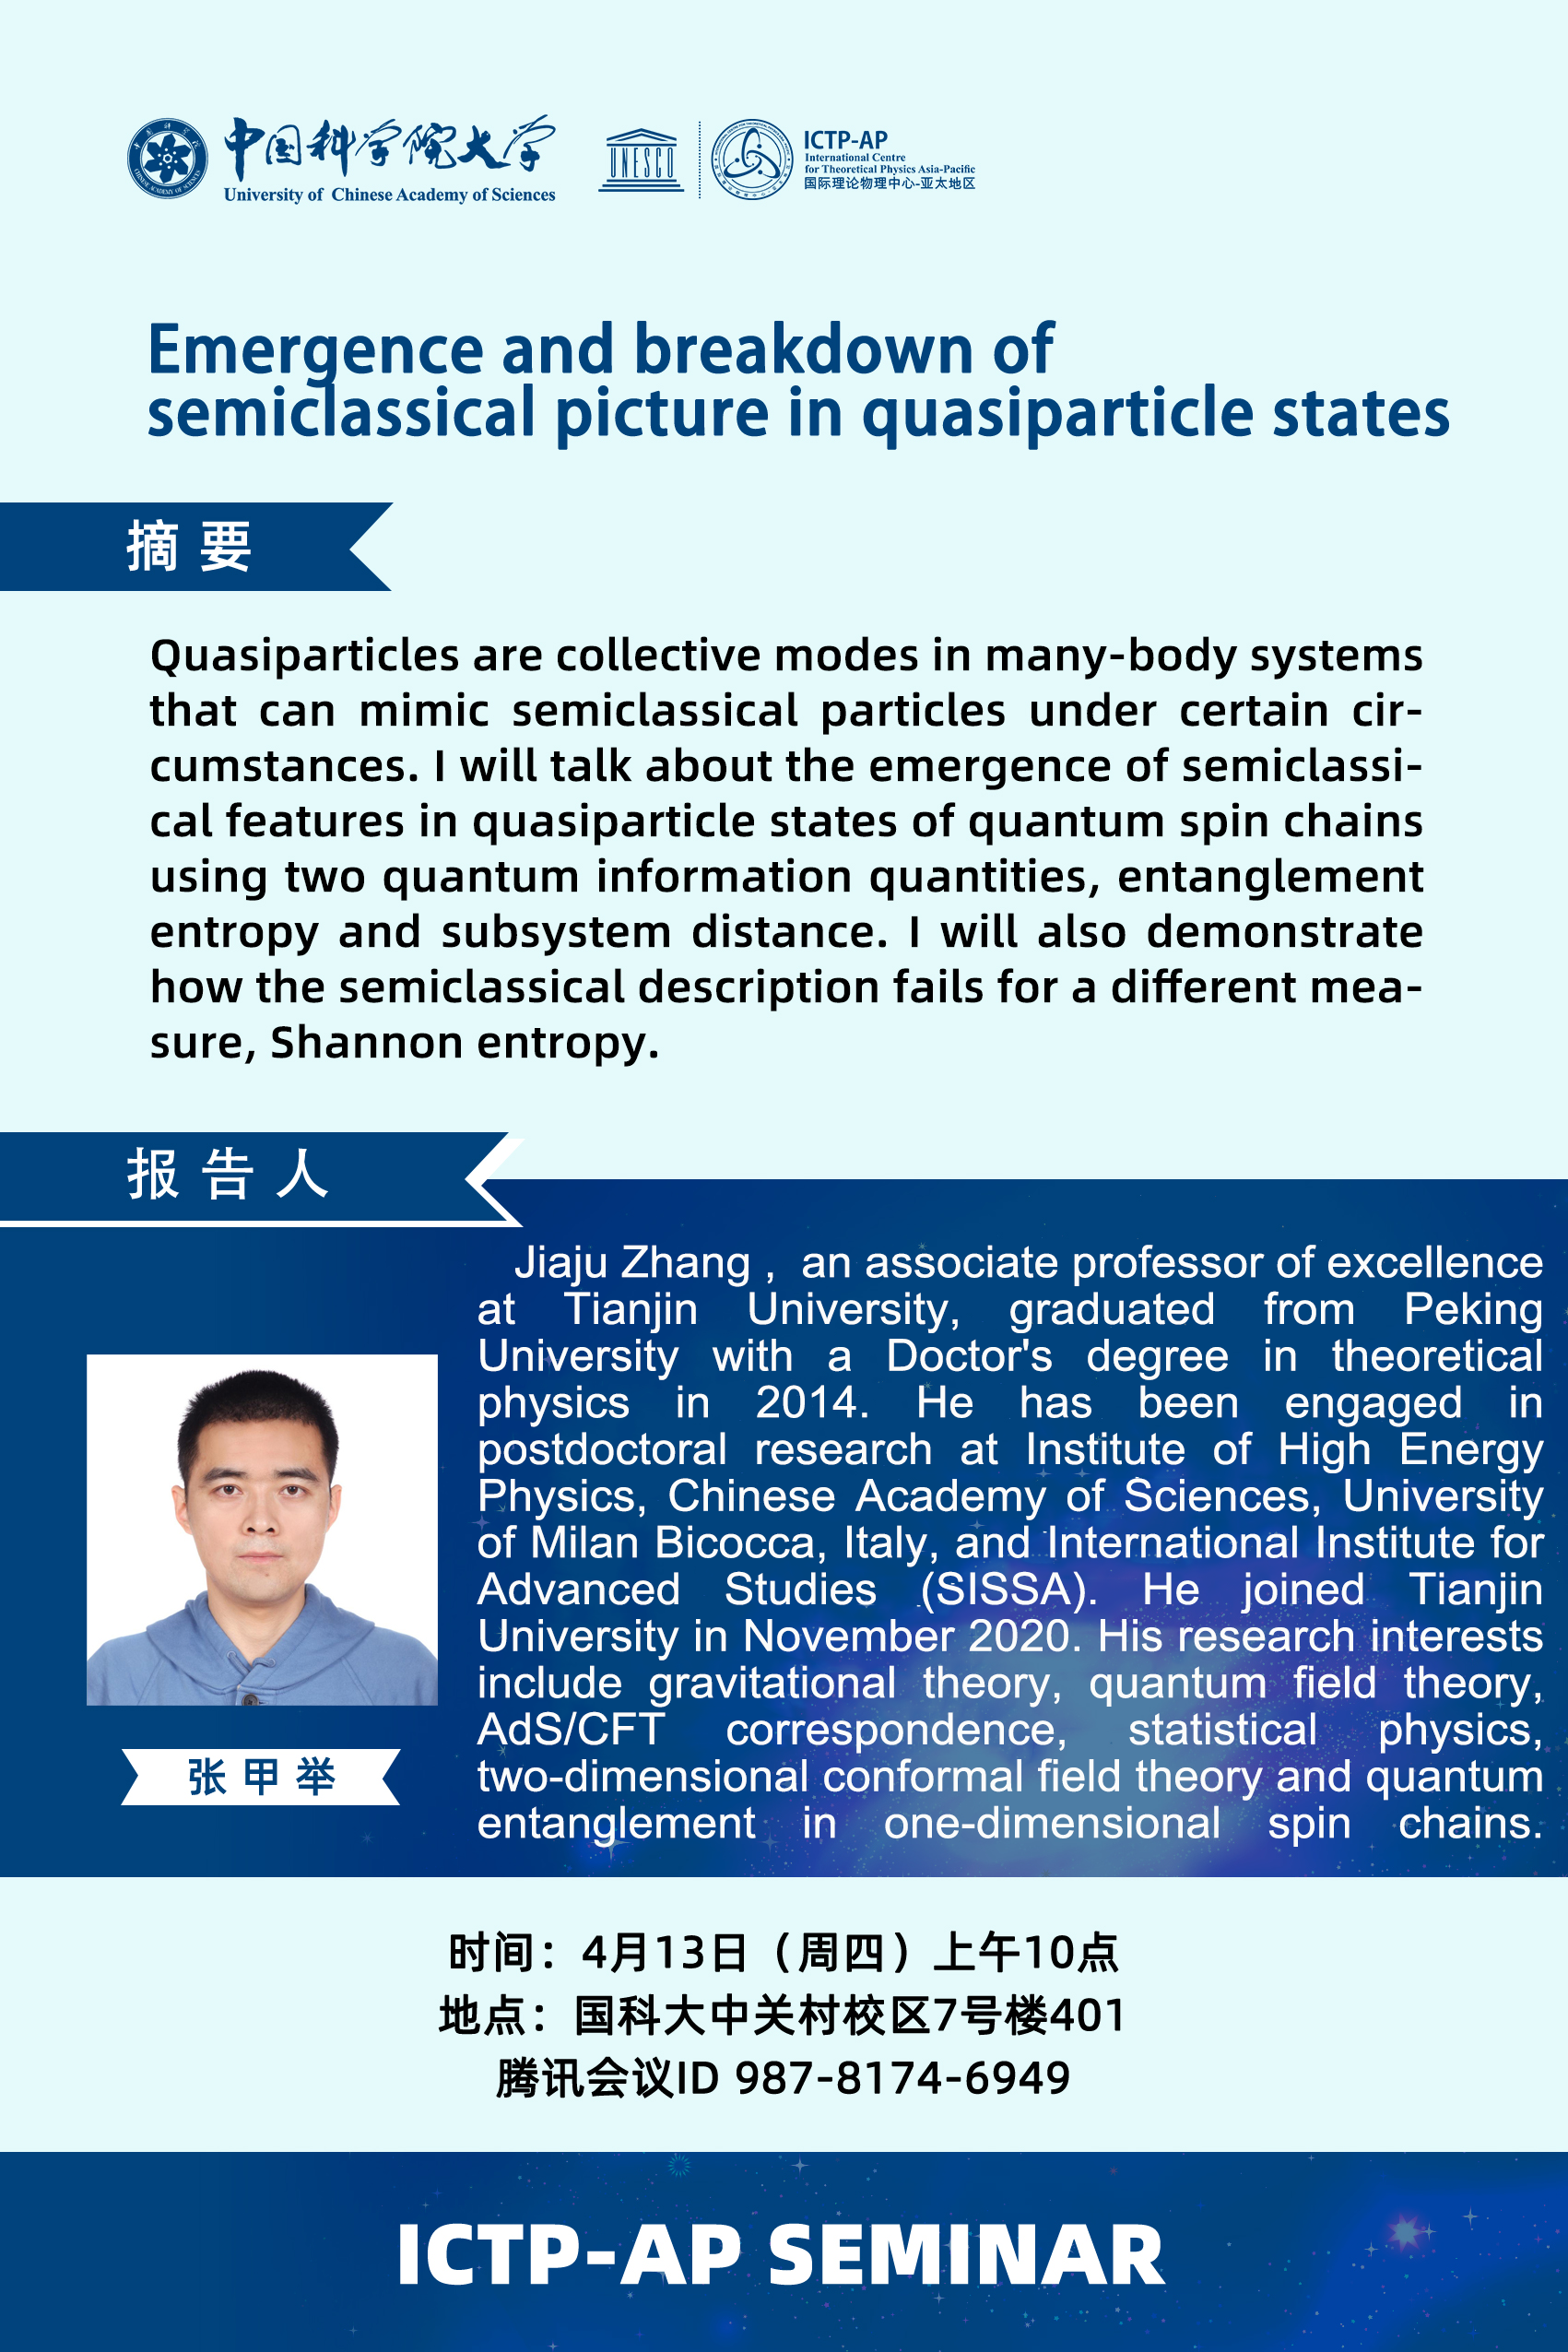 ICTP-AP Seminar: Emergence and breakdown of semiclassical picture in quasiparticle states